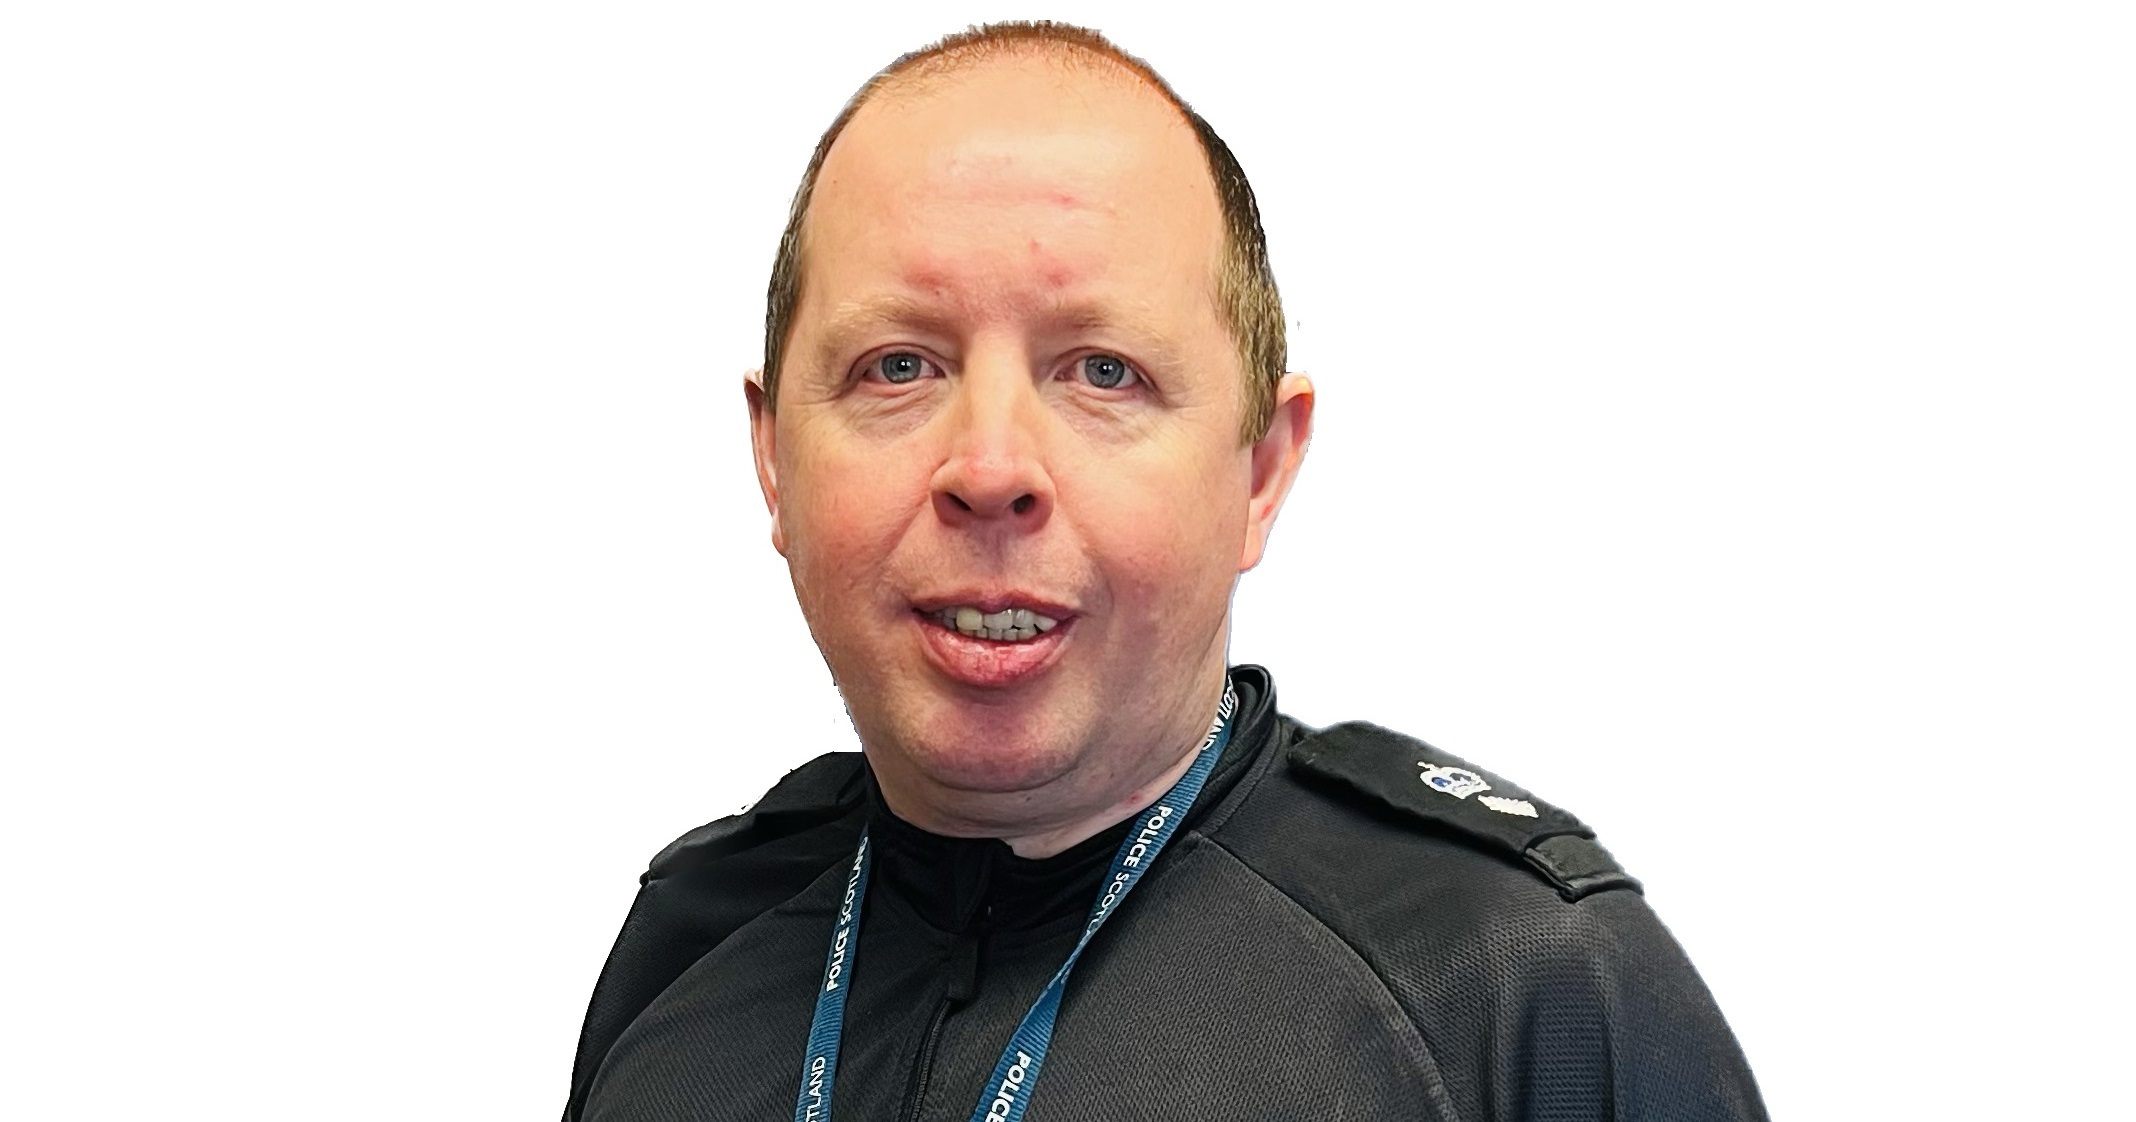 TOP COP: CS Barry Blair has taken over as the divisional commander in the Forth Valley. Image provided by Police Scotland